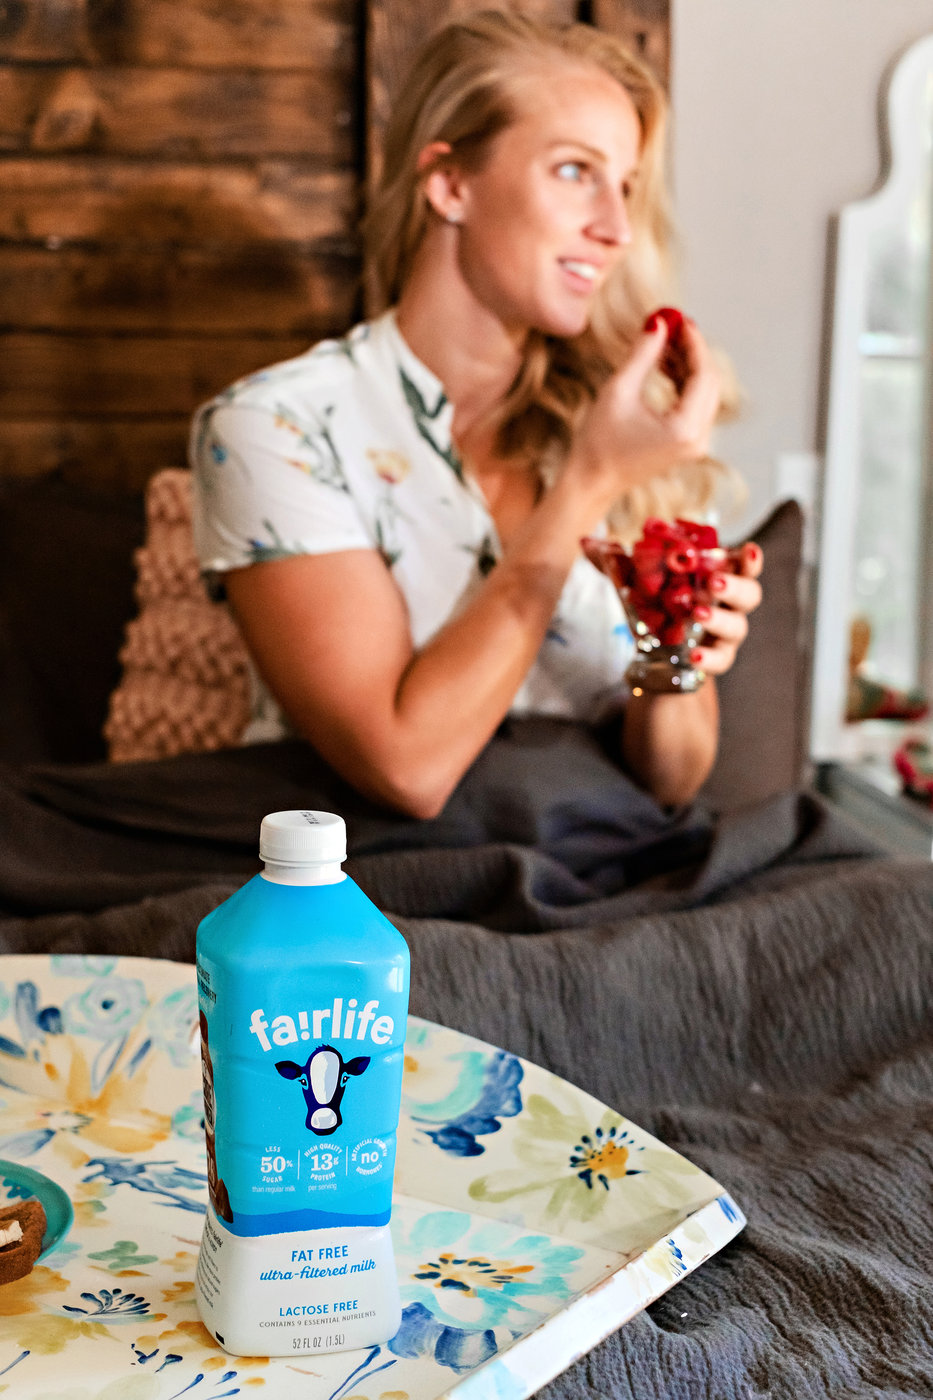 fairlife | Looking for the perfect healthy breakfast options? | Healthy Breakfast Options featured by top Atlanta fitness blog Happily Hughes 